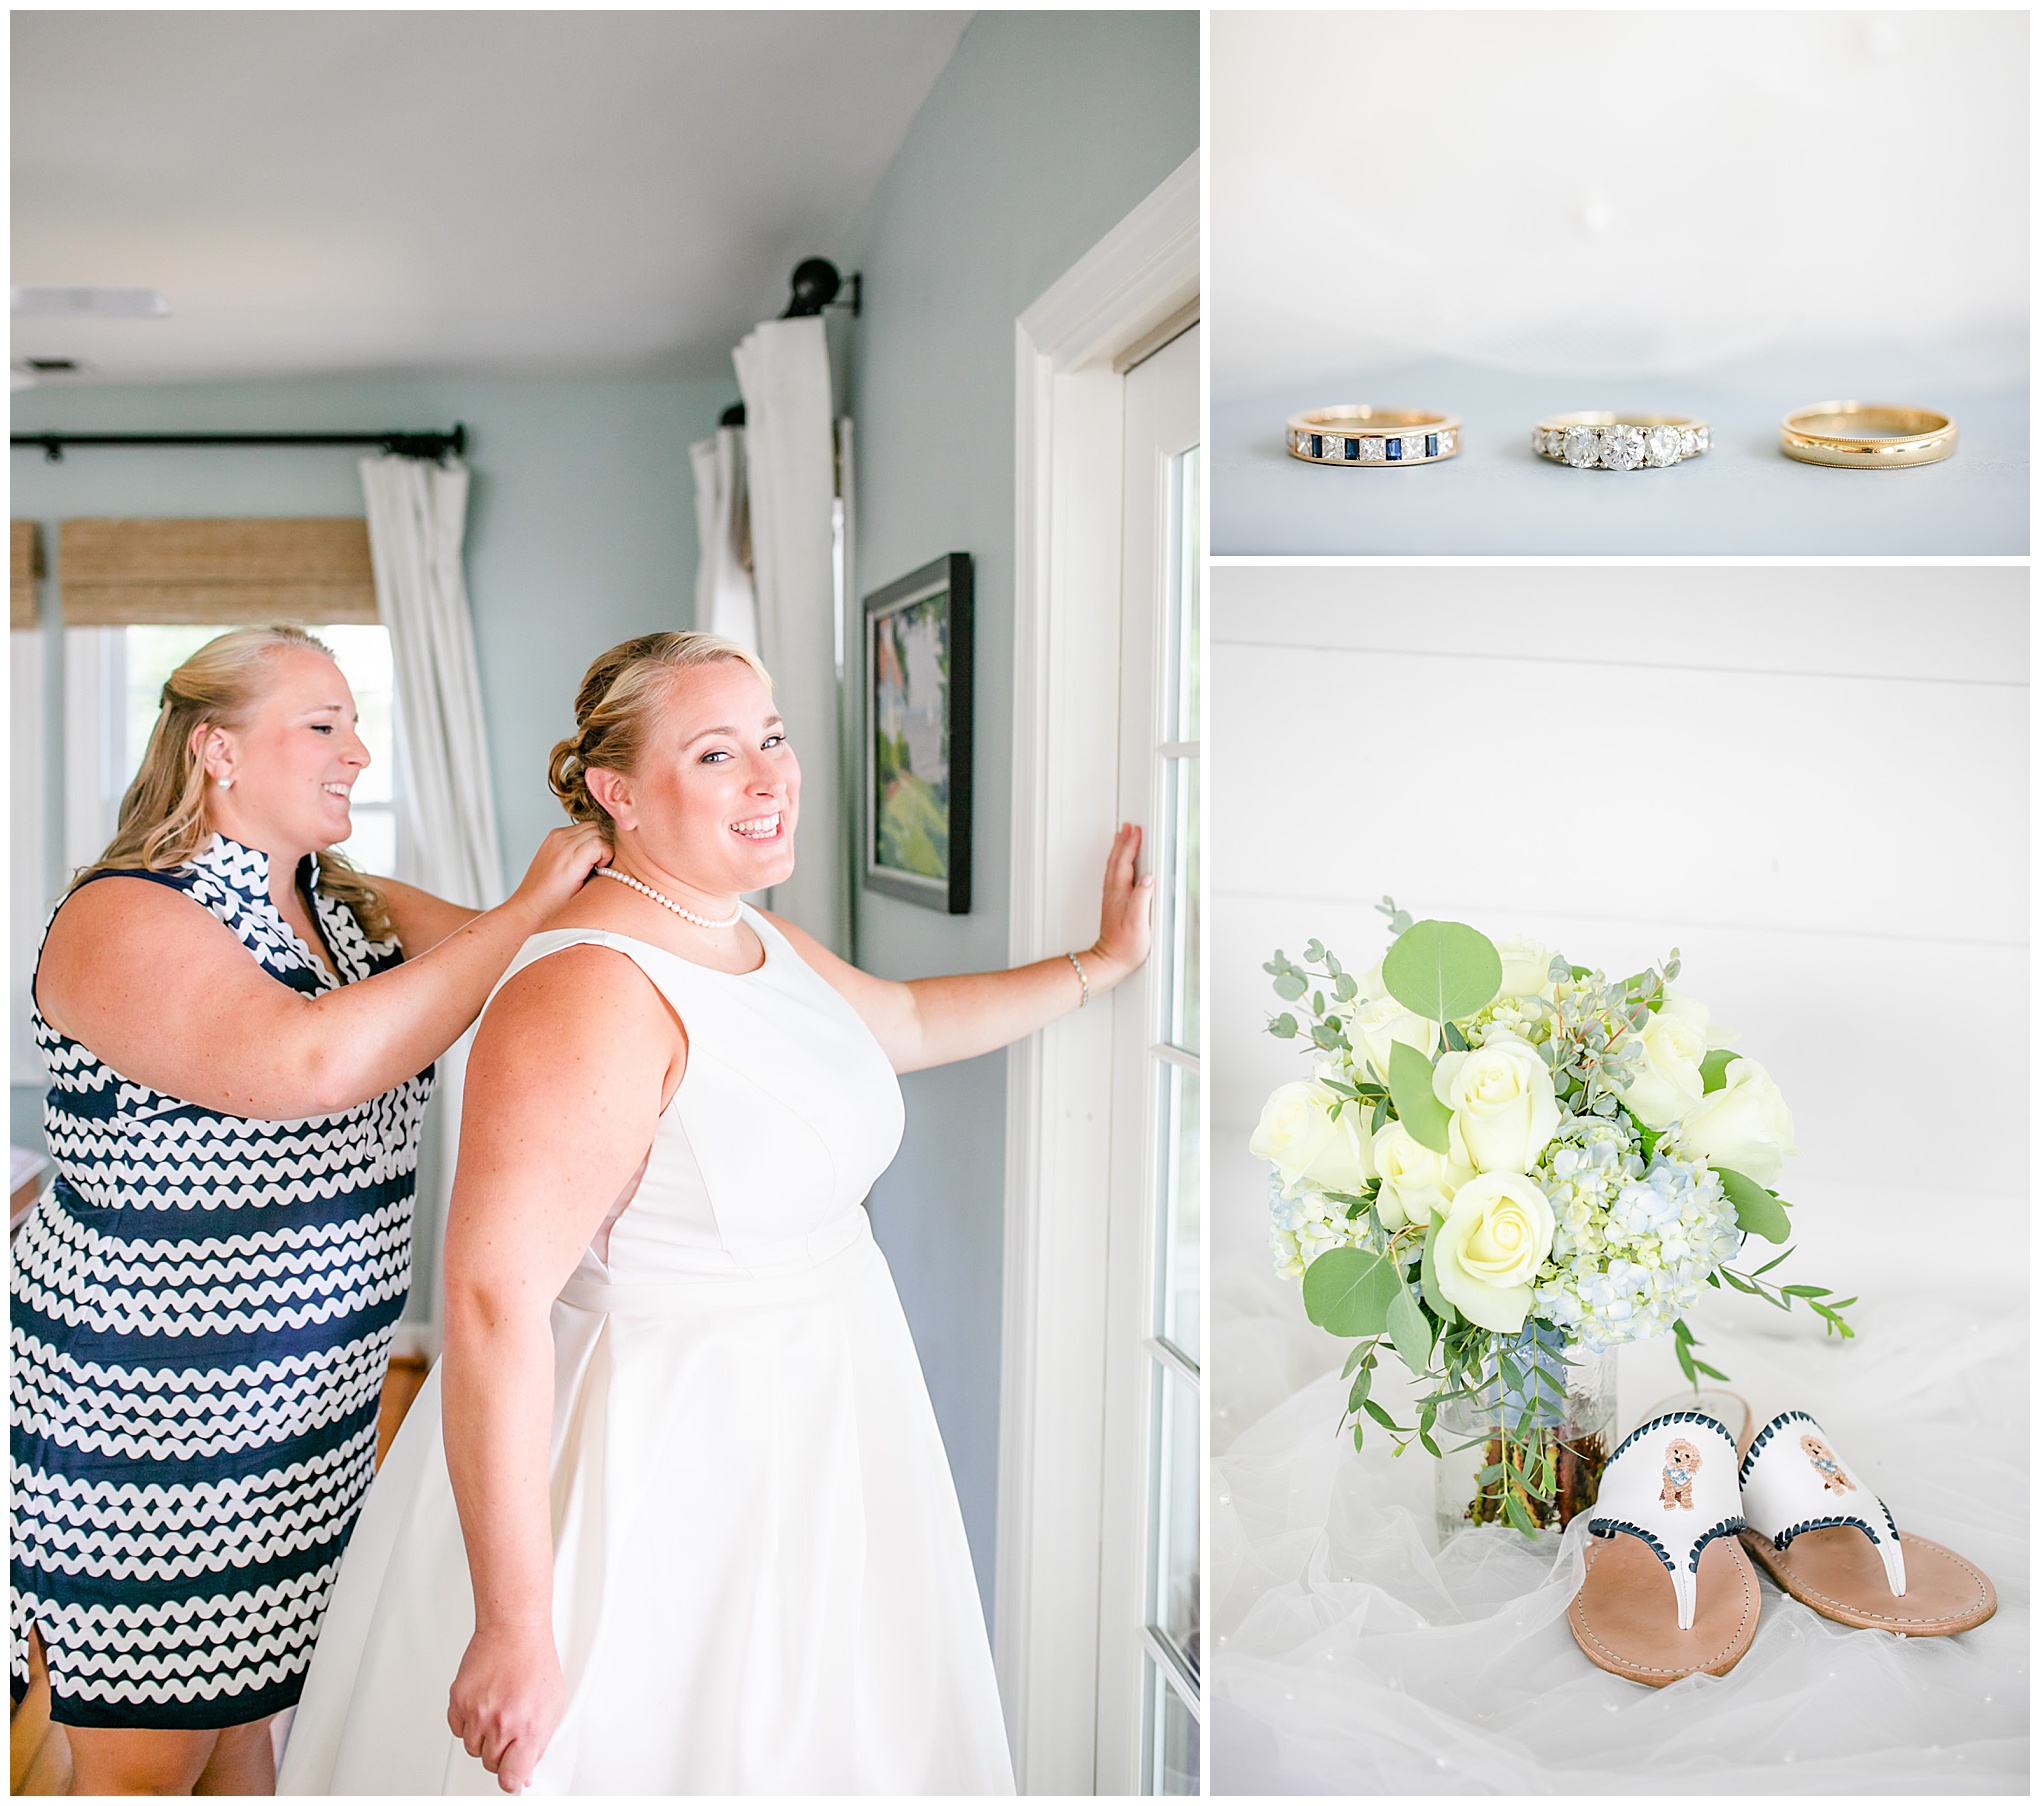 Nantucket inspired Gibson Island Club wedding, nautical wedding inspiration, Annapolitan wedding inspiration, Gibson Island Club wedding photography, Gibson Island Club wedding photographer, Annapolis wedding photographer, Baltimore wedding photographer, Maryland wedding photographer, nautical aesthetic, Annapolis wedding inspiration, Rachel E.H. Photography, bride putting on necklace, bridesmaid putting necklace on bride, white sandals, white embroidered dog sandals, york flowers wedding bouquet, gold wedding rings